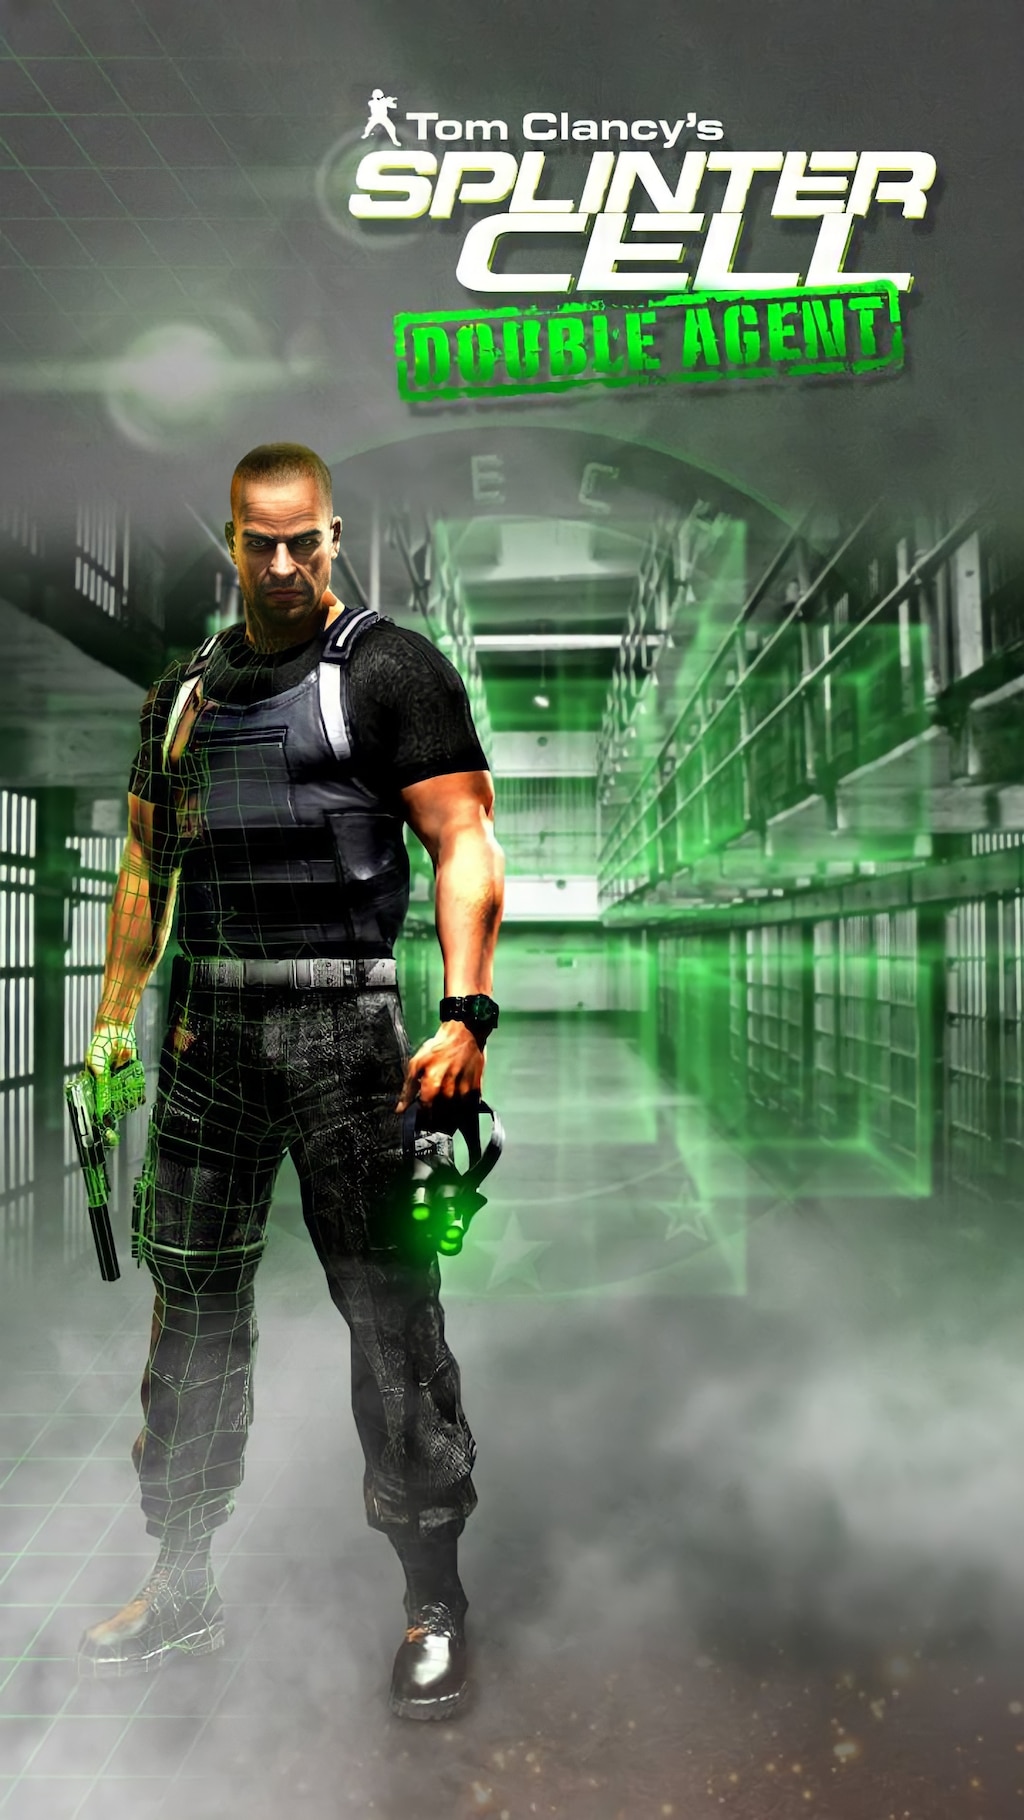 Tom Clancy's Splinter Cell Double Agent® on Steam